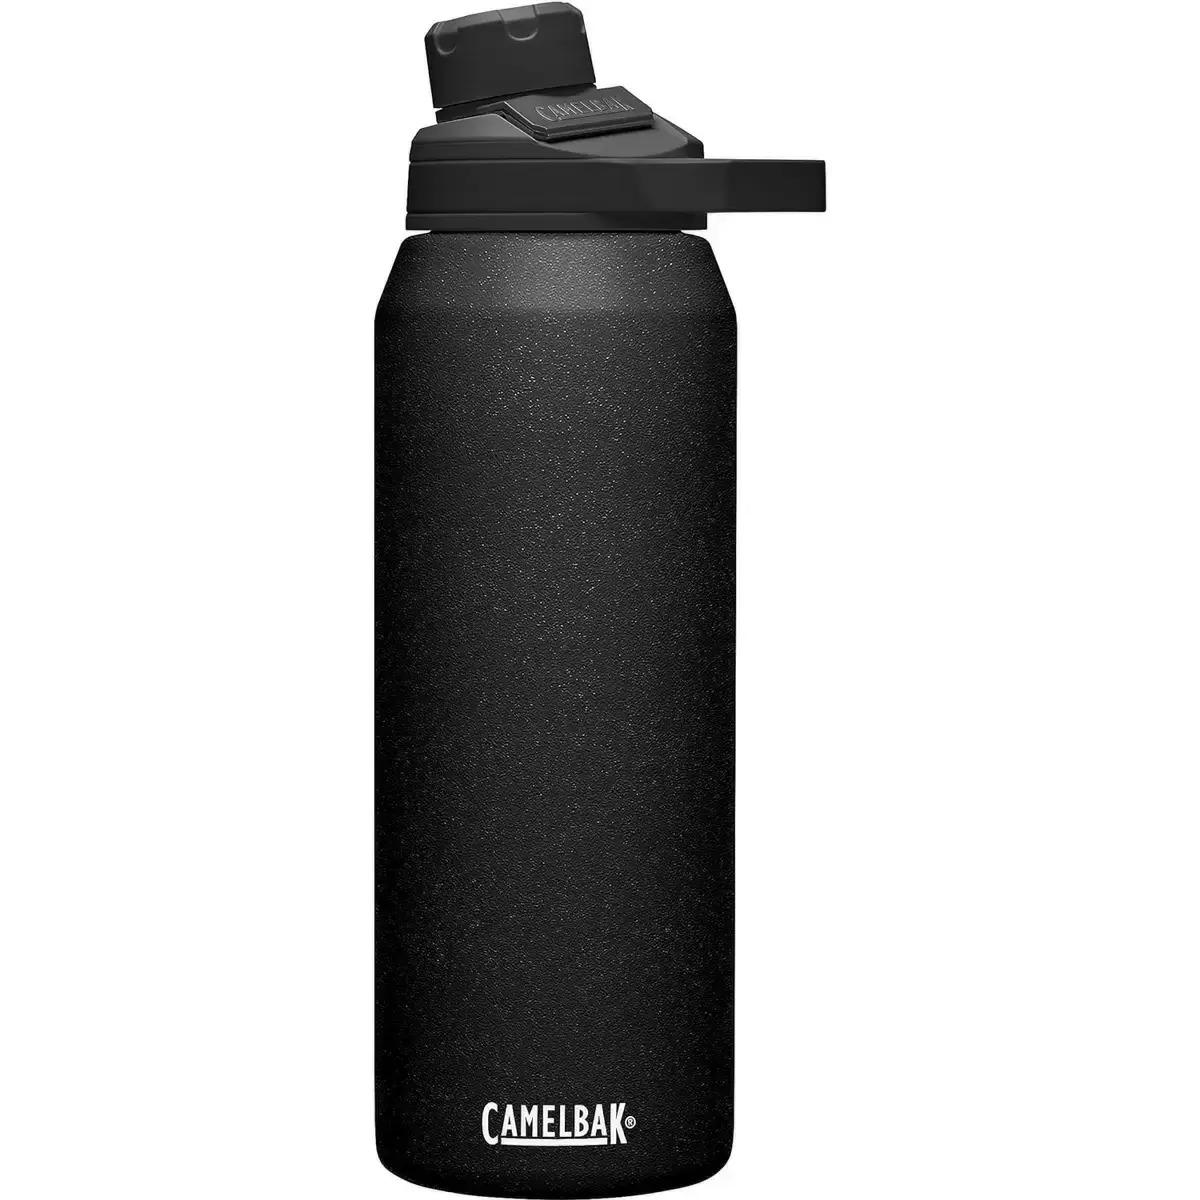 CamelBak Chute Mag Vacuum Insulated Stainless Steel Water Bottle for $16.79